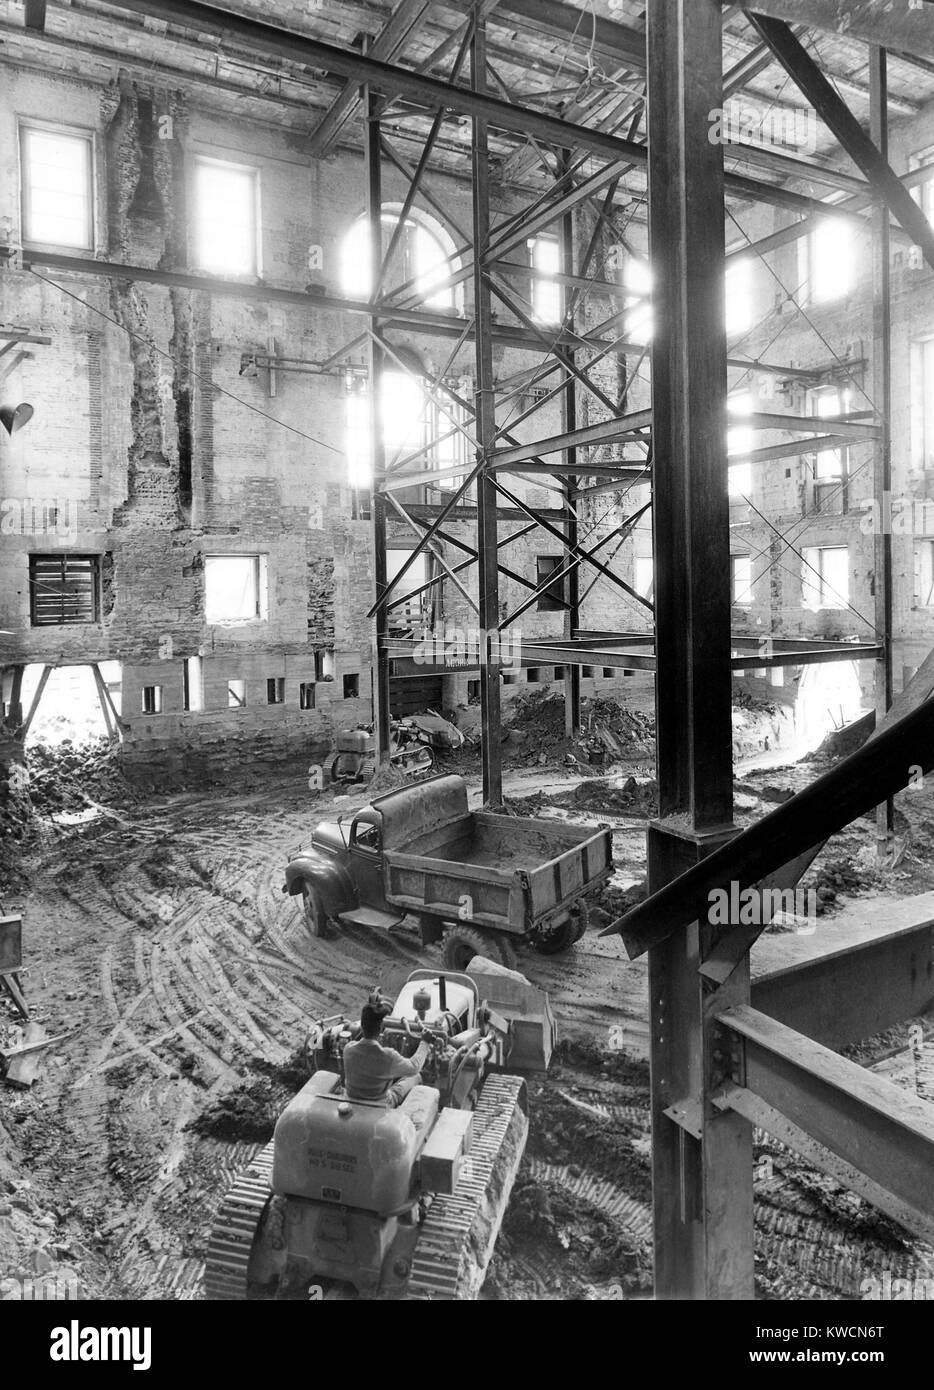 Renovation of the White House during the Truman Administration. Construction equipment inside the gutted White House. Only the brick outer walls remain of the old building. May 17, 1950. - (BSLOC 2014 15 121) Stock Photo